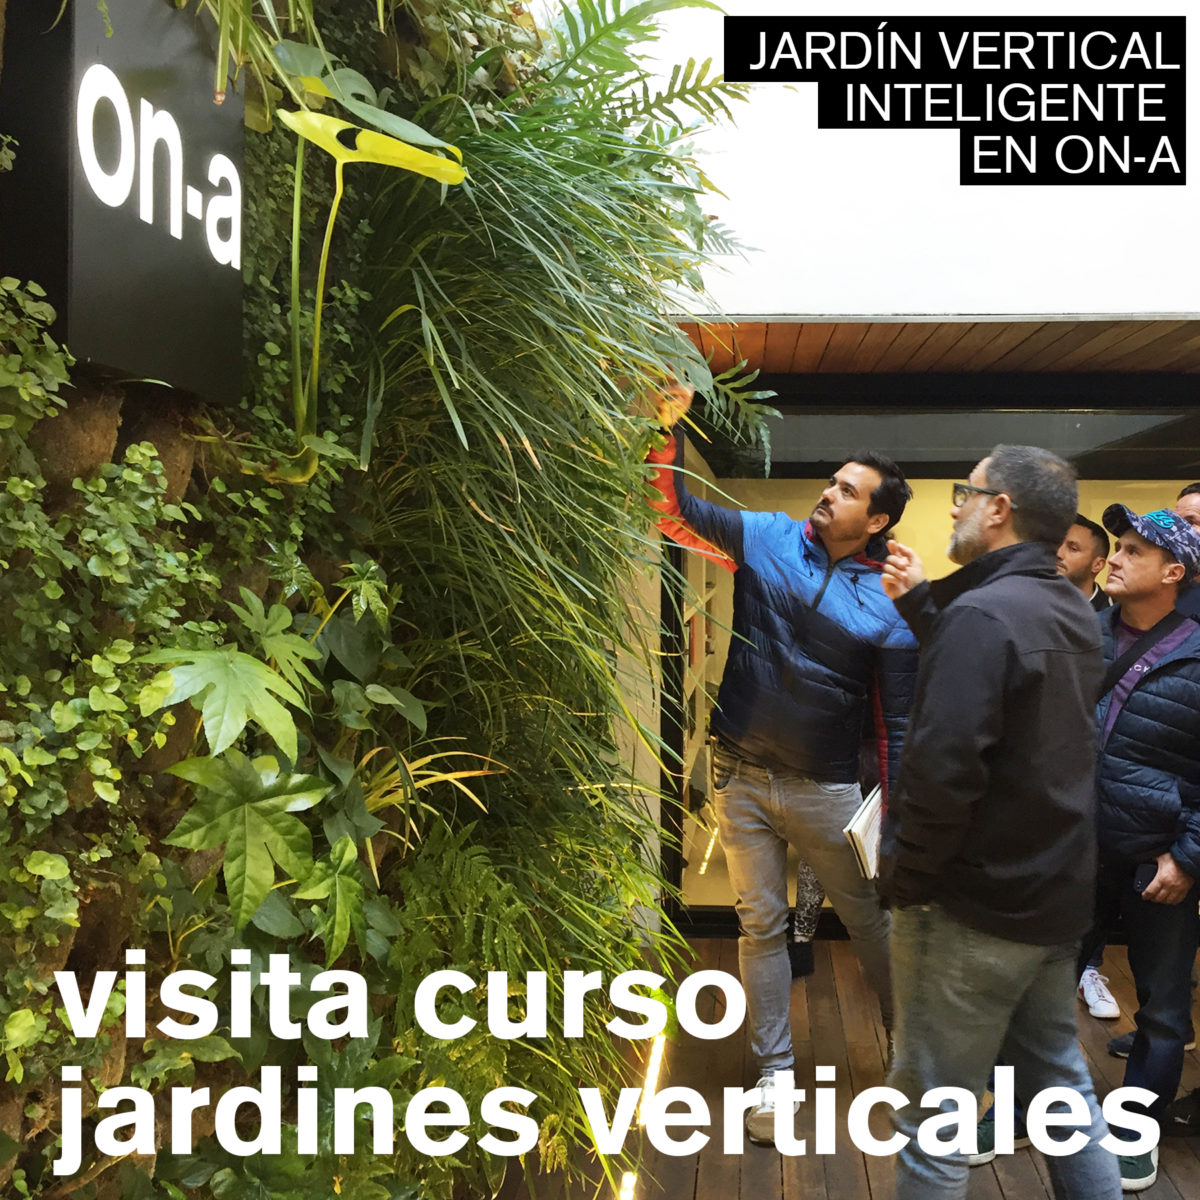 VISIT TO ON-A VERTICAL GARDENS COURSE